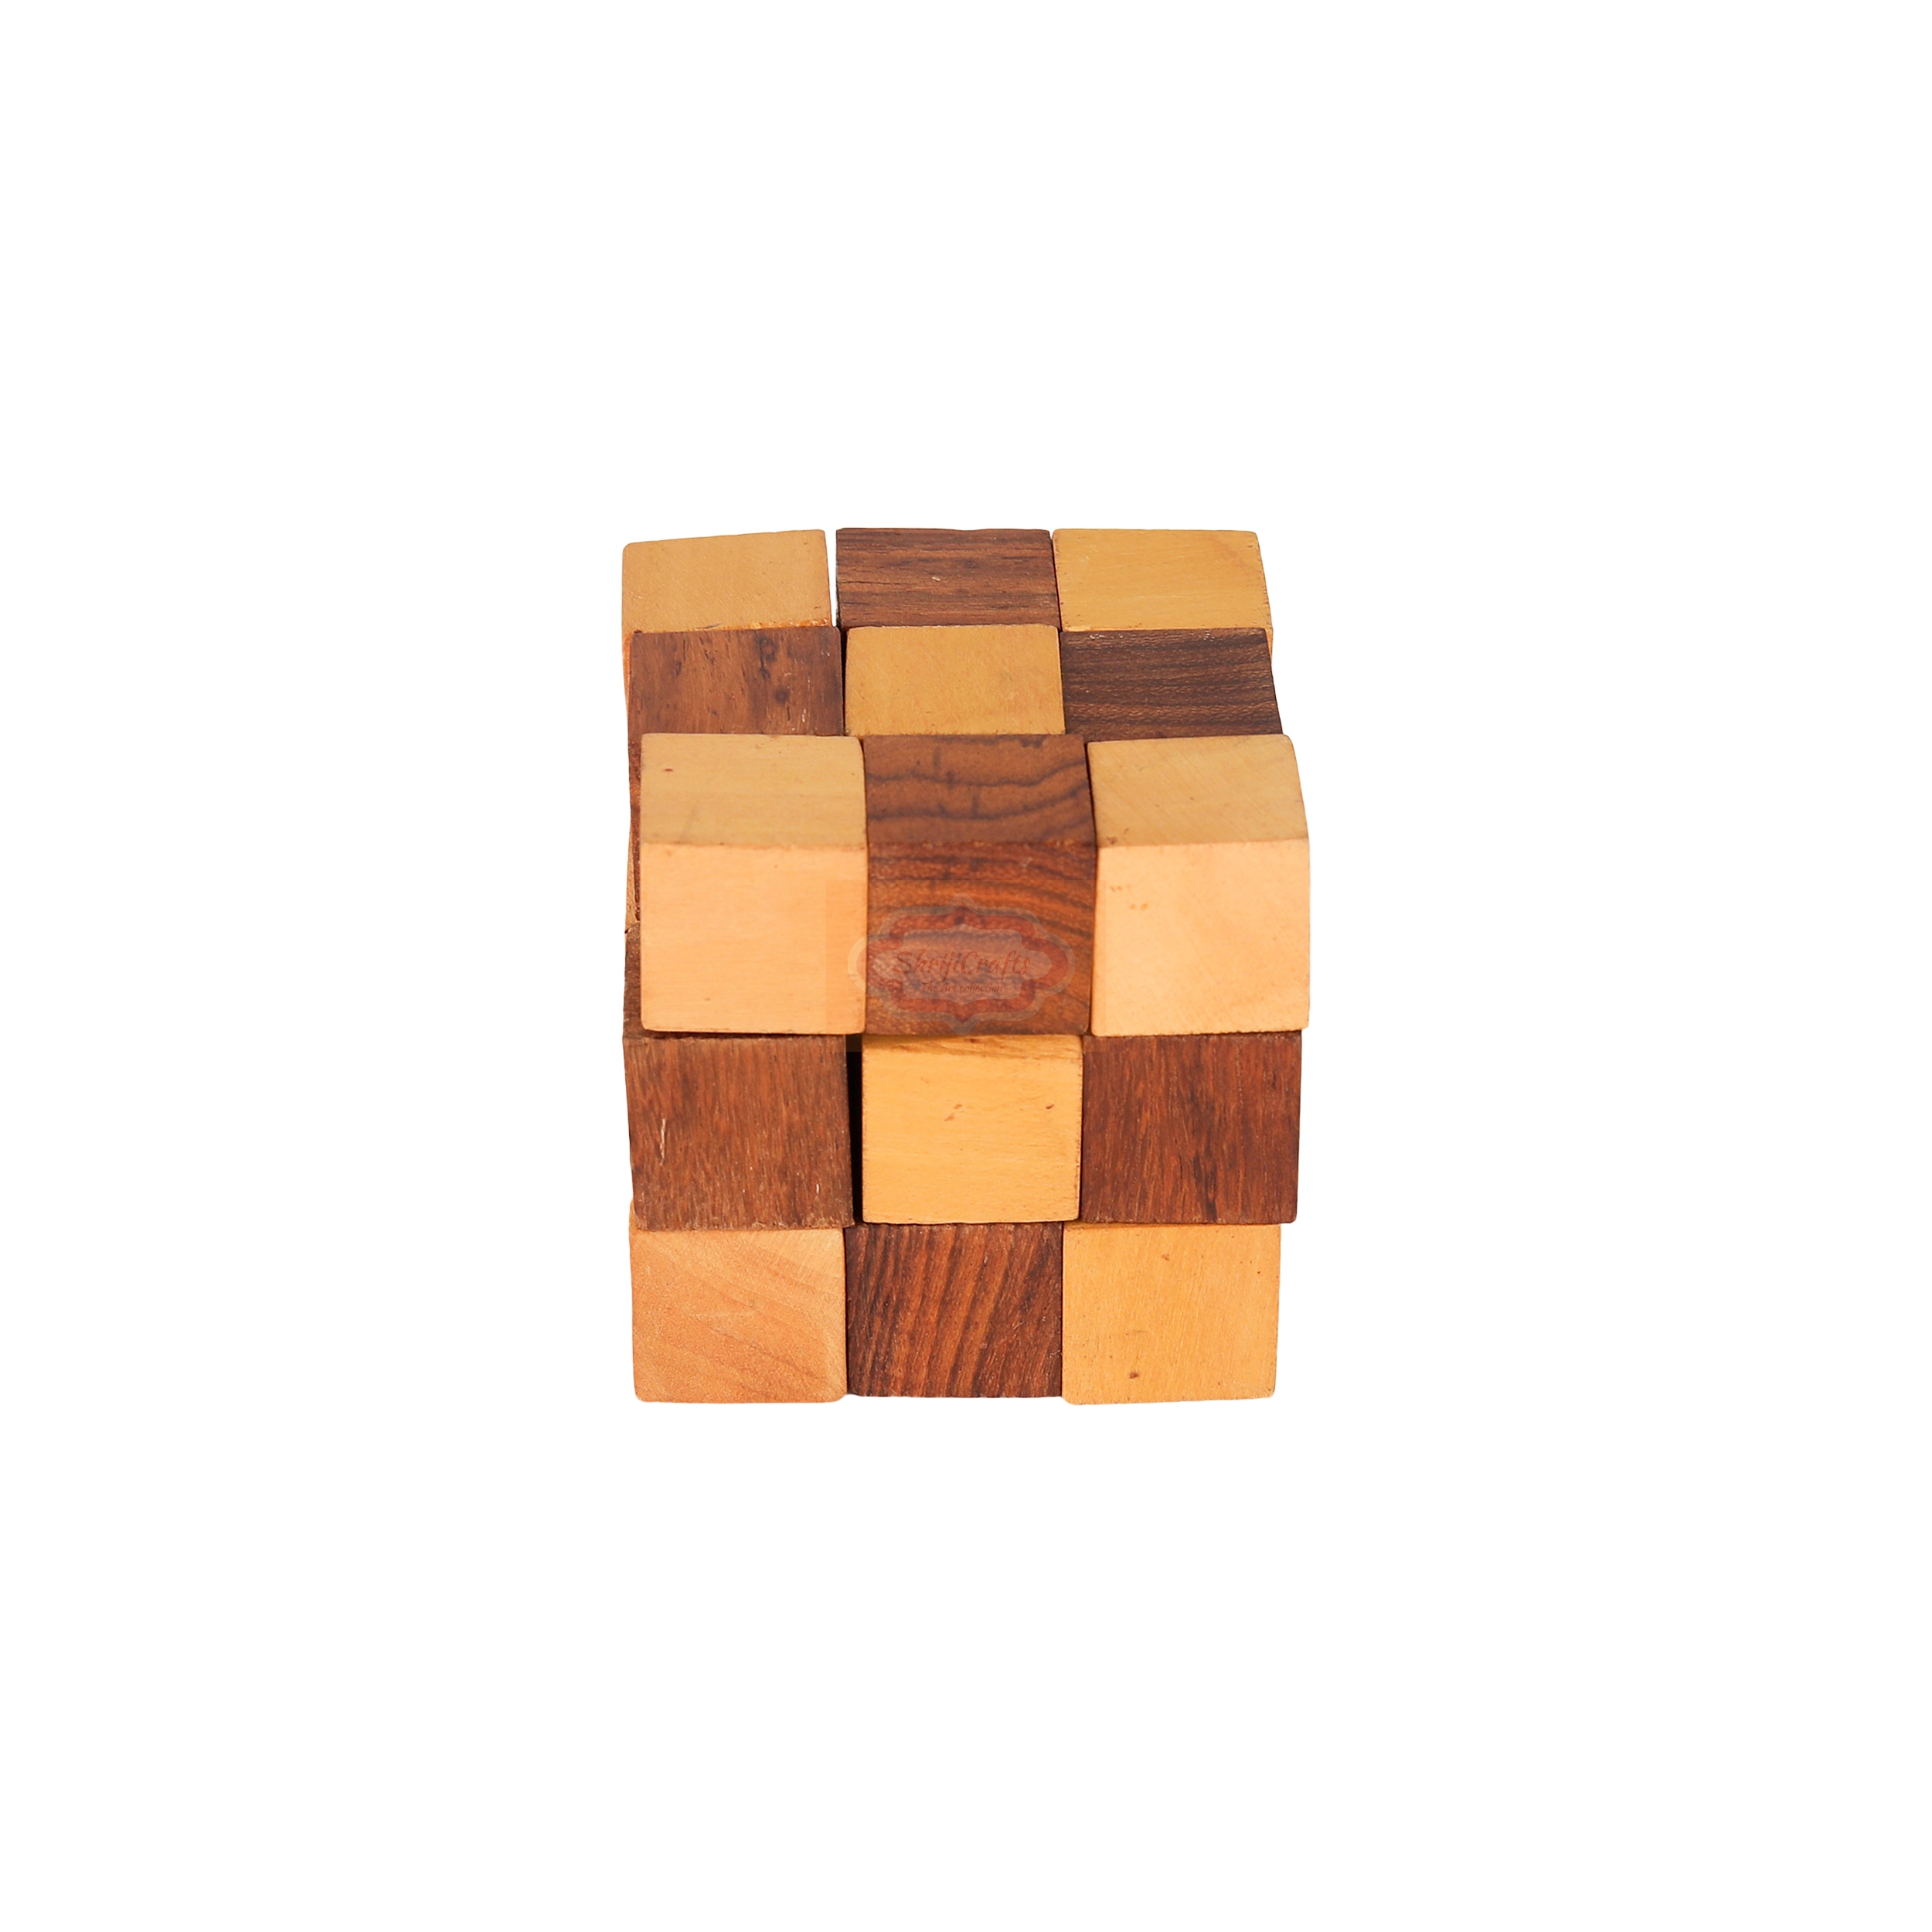 Shrijicrafts | ShrijiCrafts® Wooden IQ Teaser Puzzle Adult Snake Cube Handmade India Unique Gifts for Kids and Adult (2.5x2.5x2.5-inch)